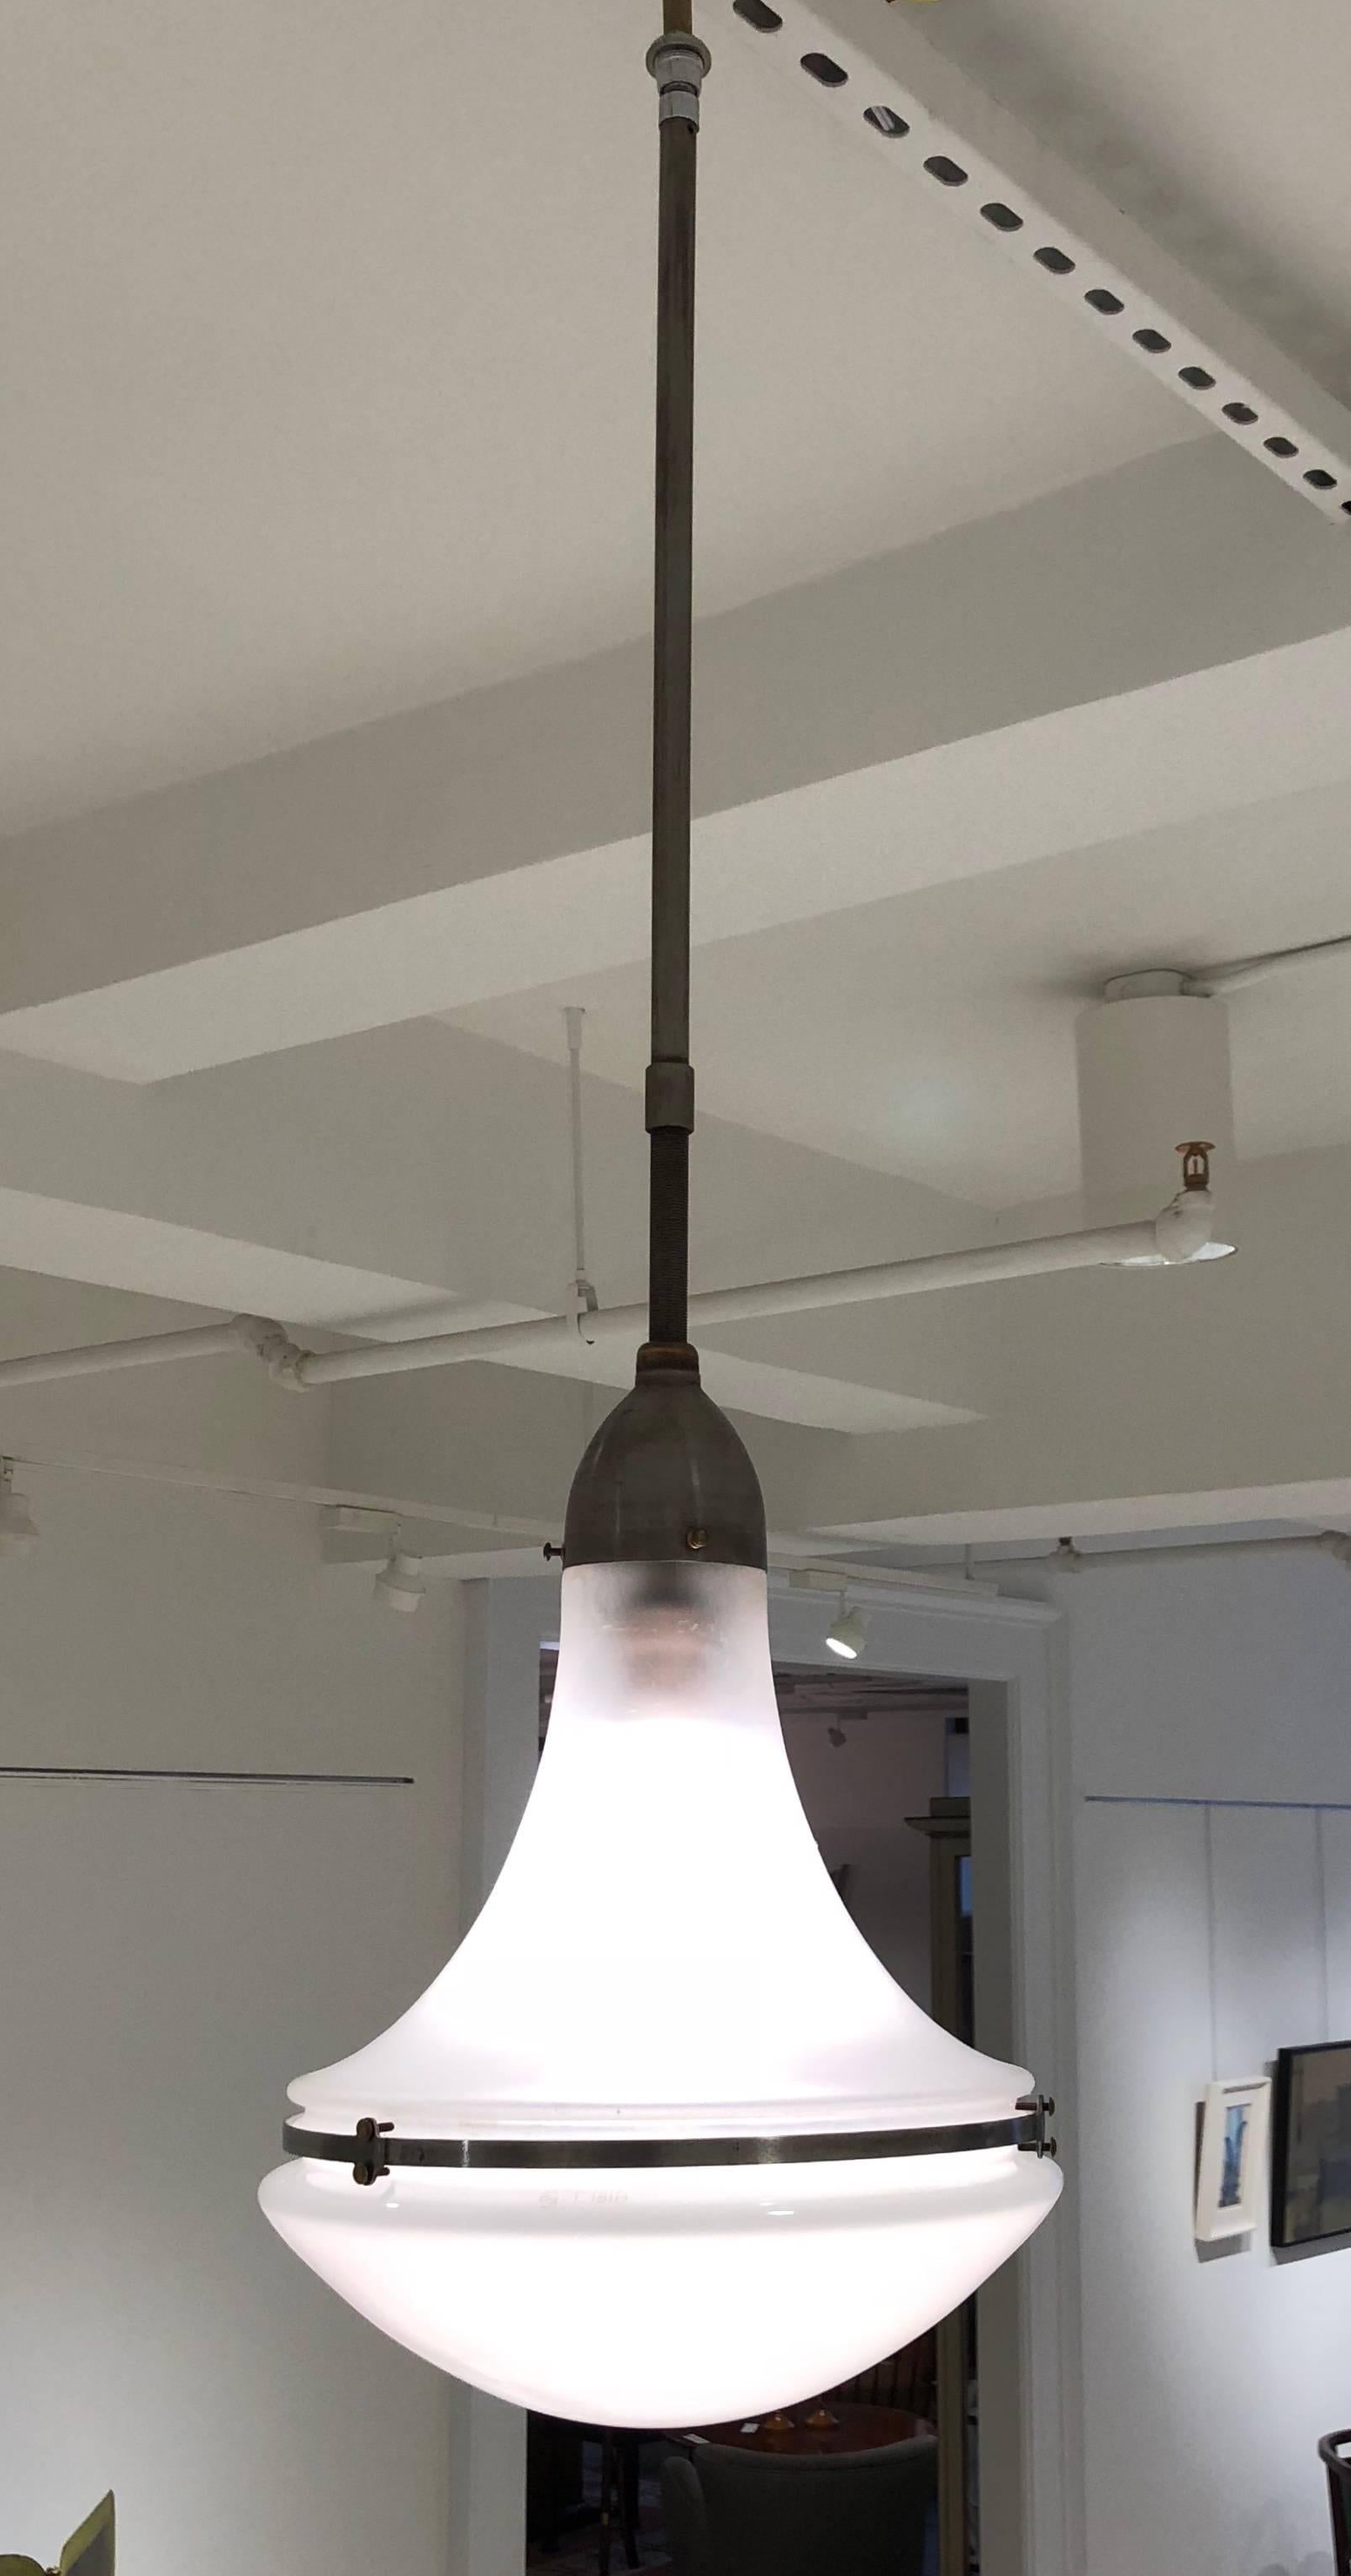 Pendant fixture with frosted glass upper section and opaline glass bottom section, designed by Peter Behrens and produced by Siemens, Germany, circa 1920. With original fittings, including the metal canopy. Measurements are of the fixture only; top